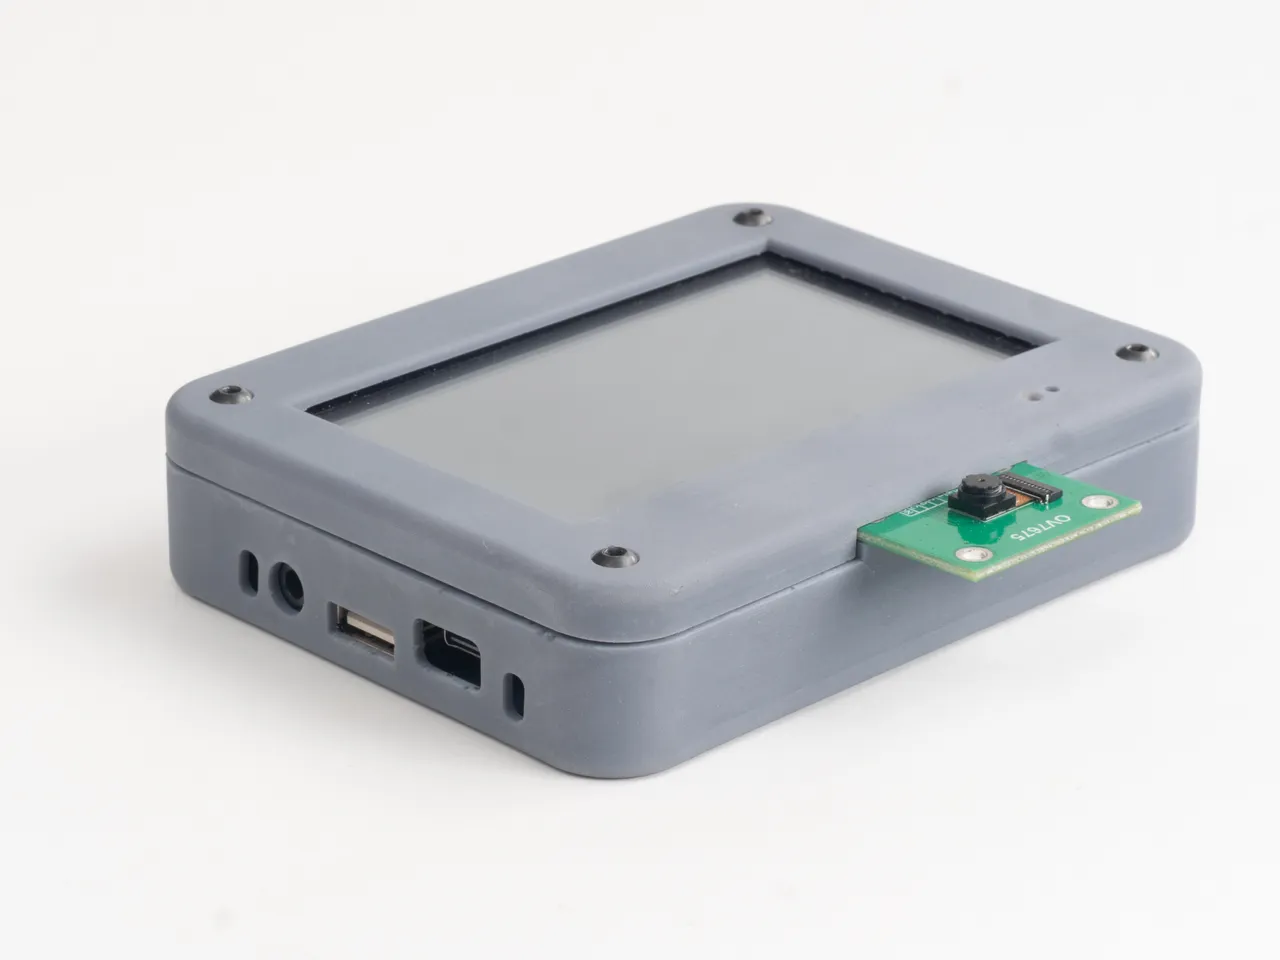 Enclosure for Arduino GIGA R1 WiFi and GIGA Display Shield by Arduino, Download free STL model